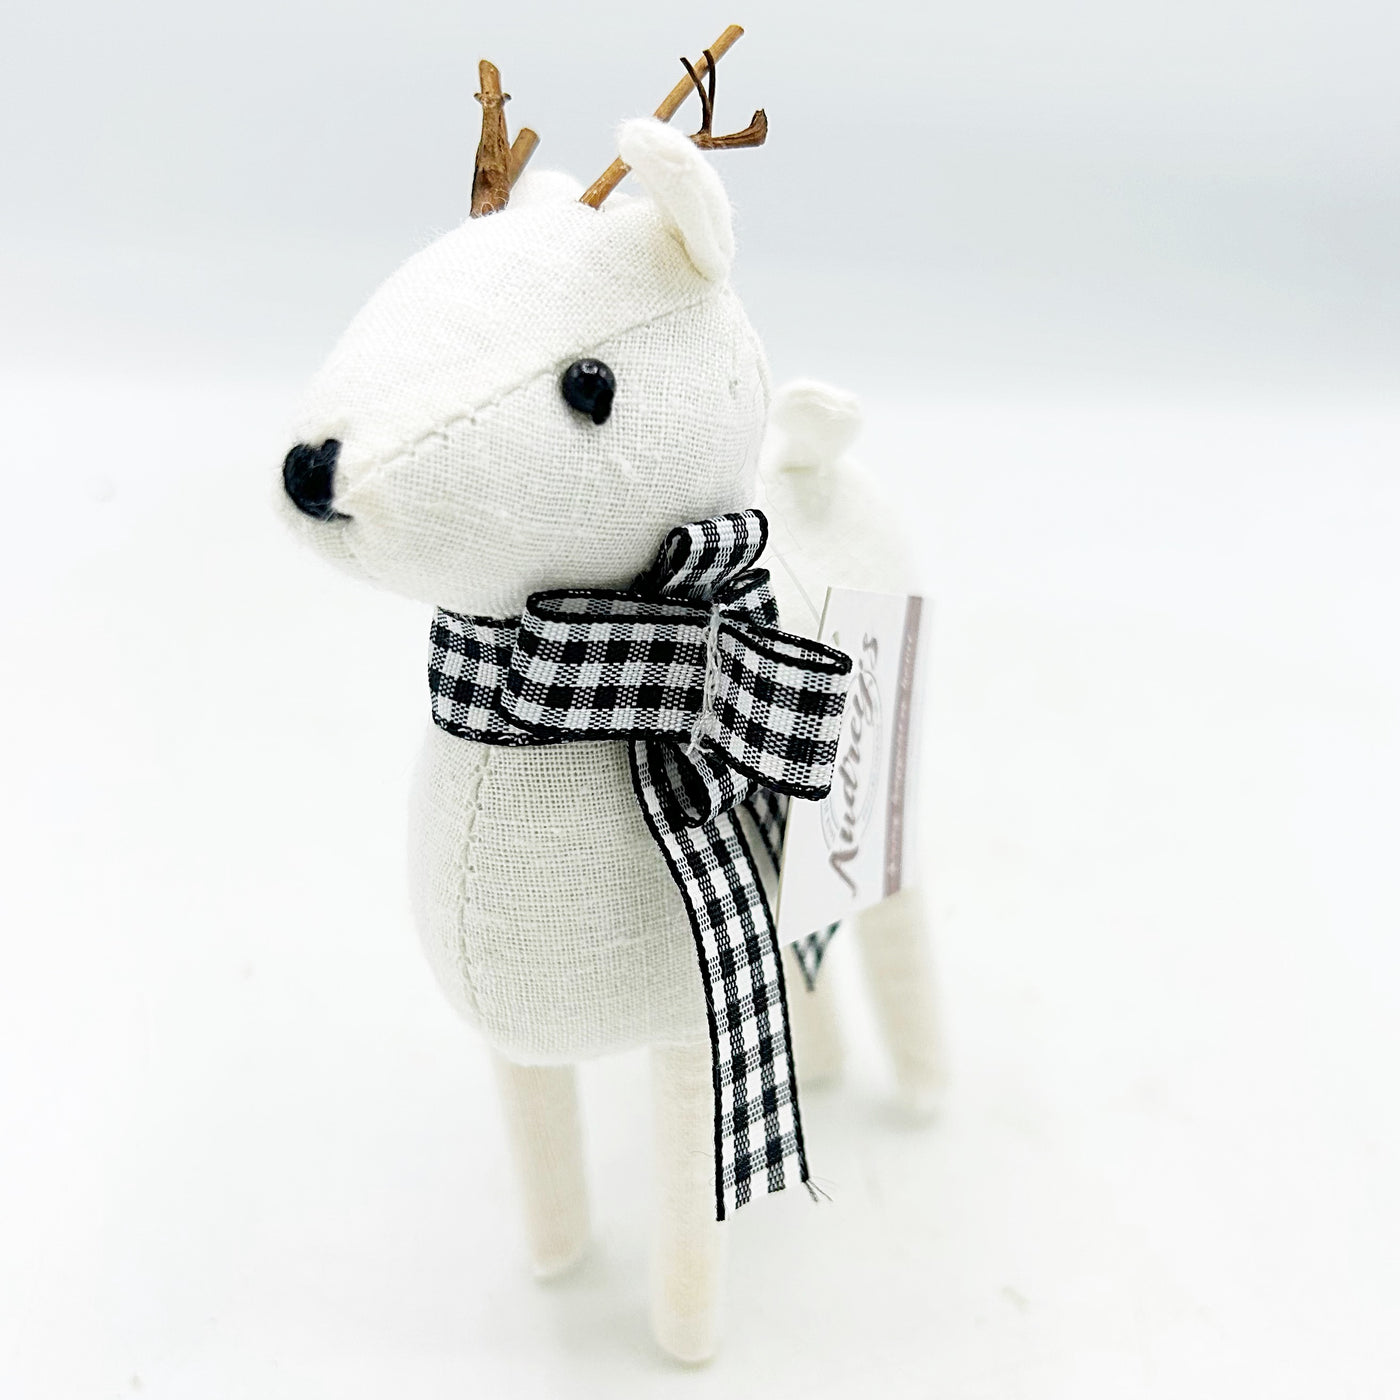 Little Deer With Christmas White and Black Plaid Scarf Fabric Figure